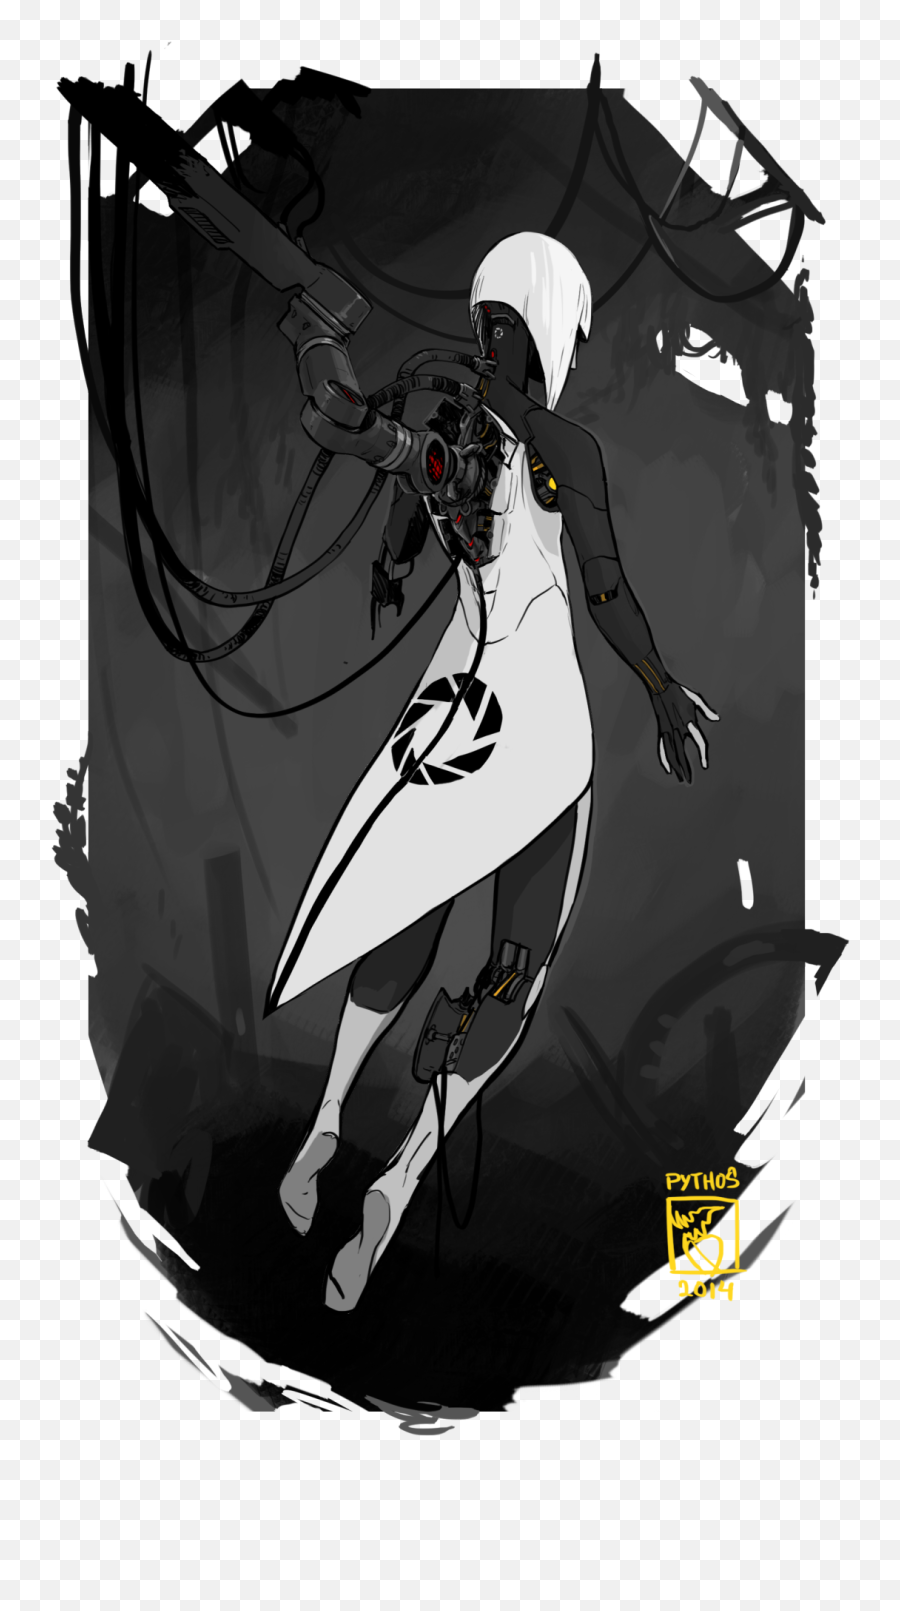 You Monster Humanized Glados By Pythosart - Portal Aperture Science Art Png,Glados Png